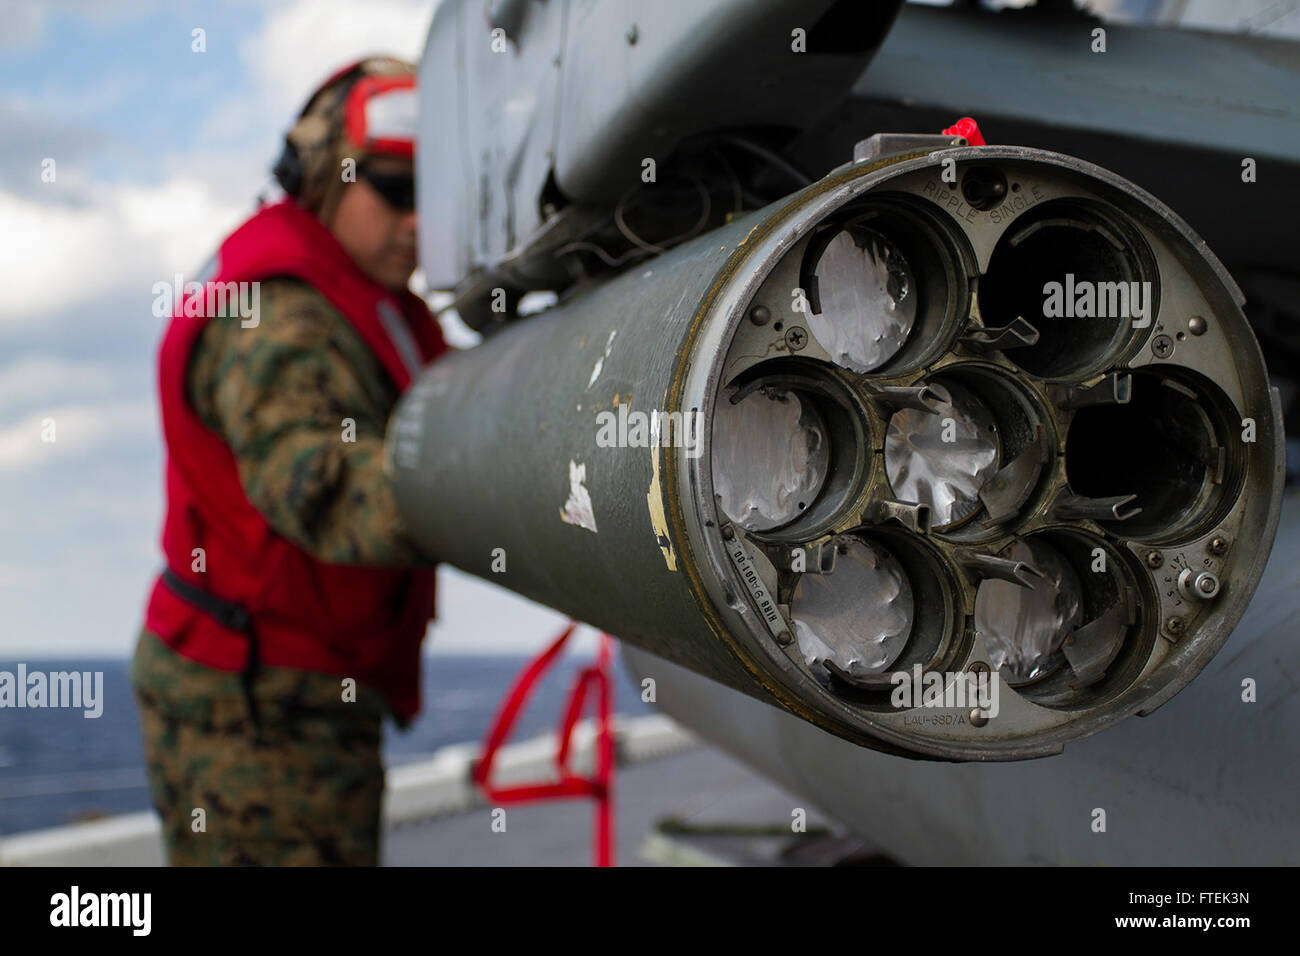 150107-M-WA276-052 MEDITERRANEAN SEA (Jan. 7, 2015) Gunnery Sergeant Edward Lujan, an aviation ordnance chief with Marine Medium Tiltrotor Squadron 365 (Reinforced), 24th Marine Expeditionary Unit, loads a 2.75-inch rocket in to a LAU-68 rocket pod attached to an AH-1W Cobra attack helicopter aboard USS Iwo Jima (LPD 7) Jan. 7, 2015. The 24th MEU and Iwo Jima Amphibious Ready Group are conducting naval operations in the U.S. 6th Fleet area of operations in support of U.S. national security interests in Europe. (U.S. Marine Corps photo by Lance Corporal Dani A. Zunun) Stock Photo